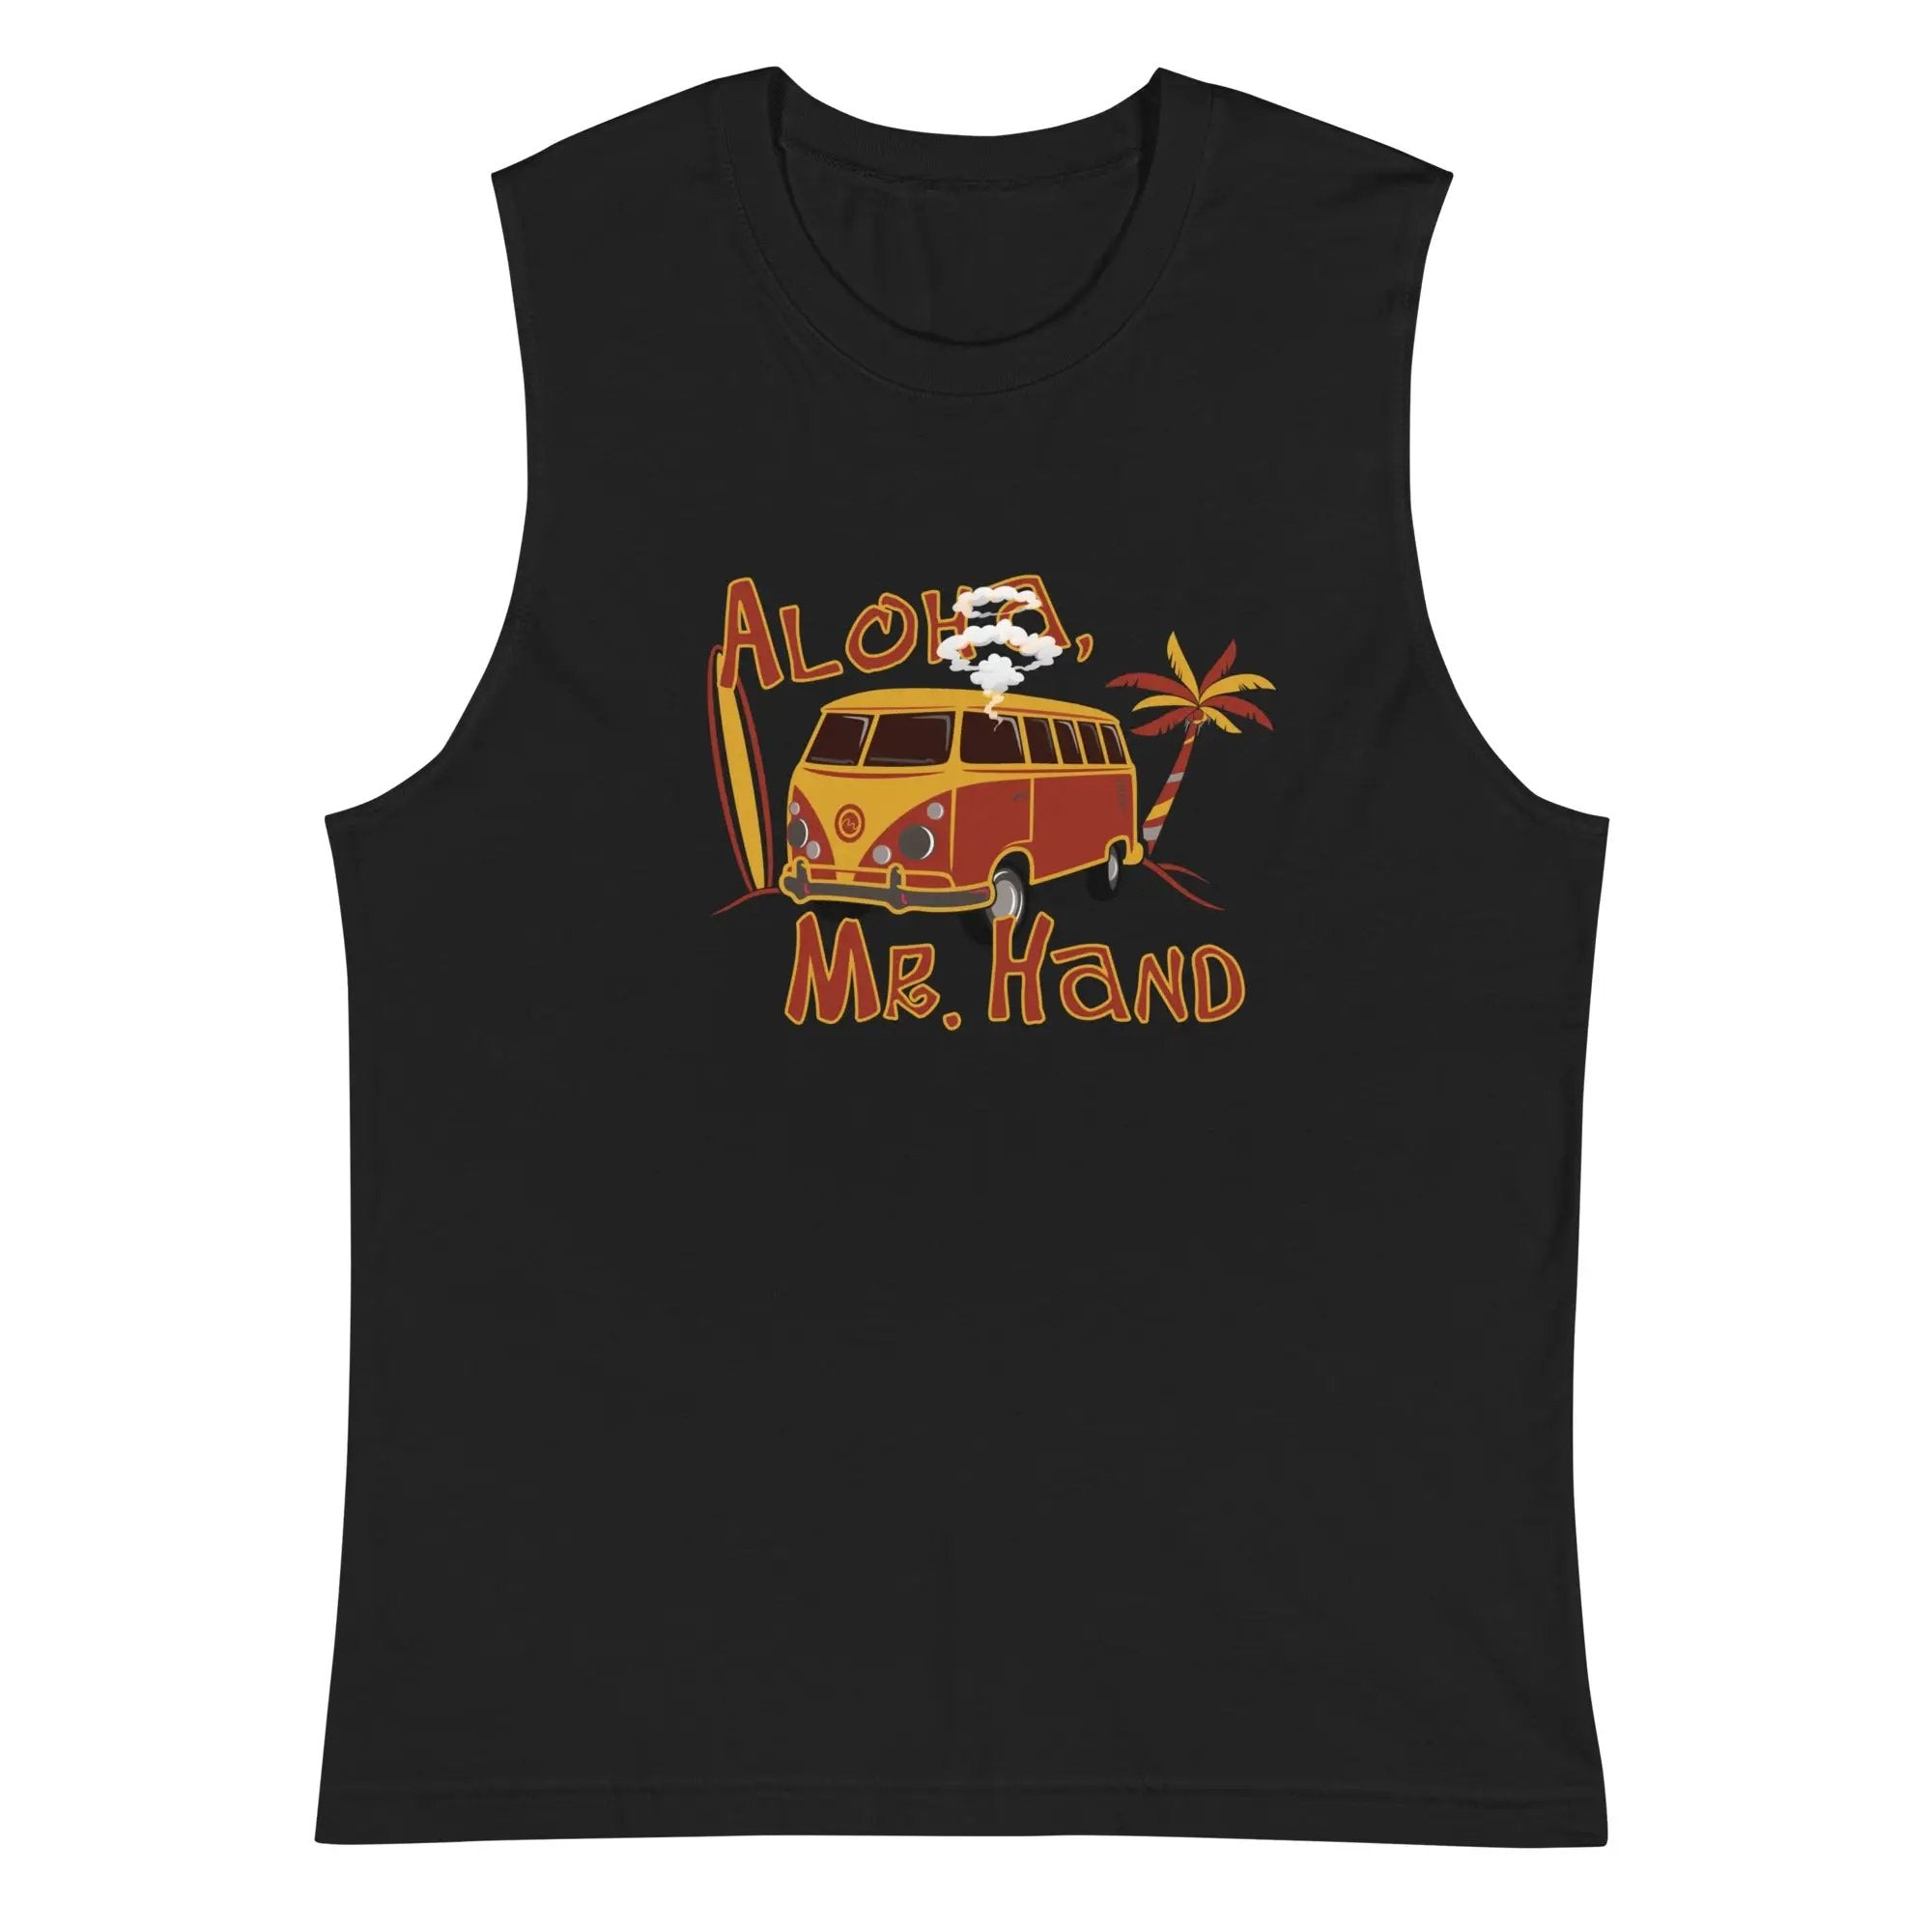 a black tank top with an image of a van and palm trees